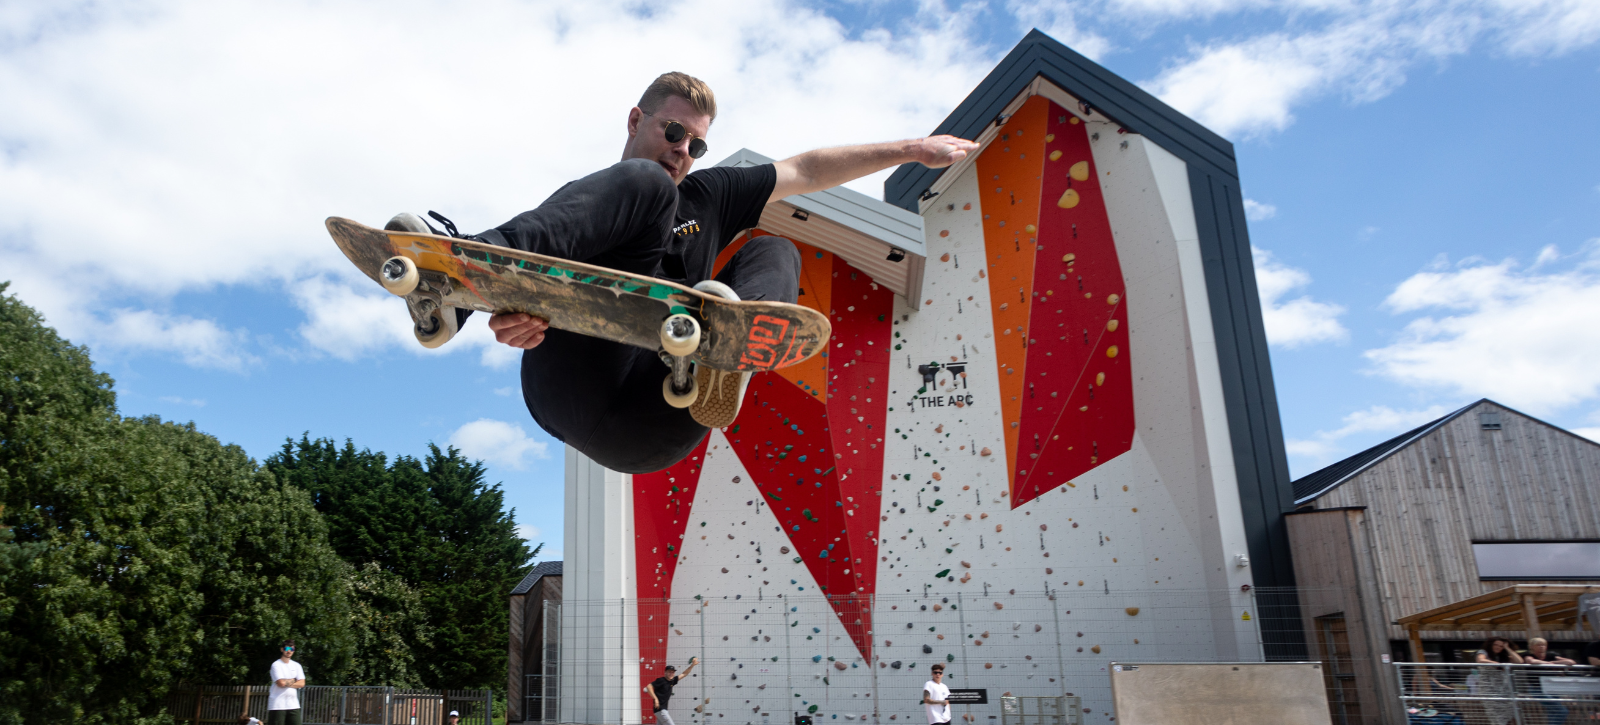 A skateboarder does a trick suspended off the ground in front of The Arc's outside climbing wall